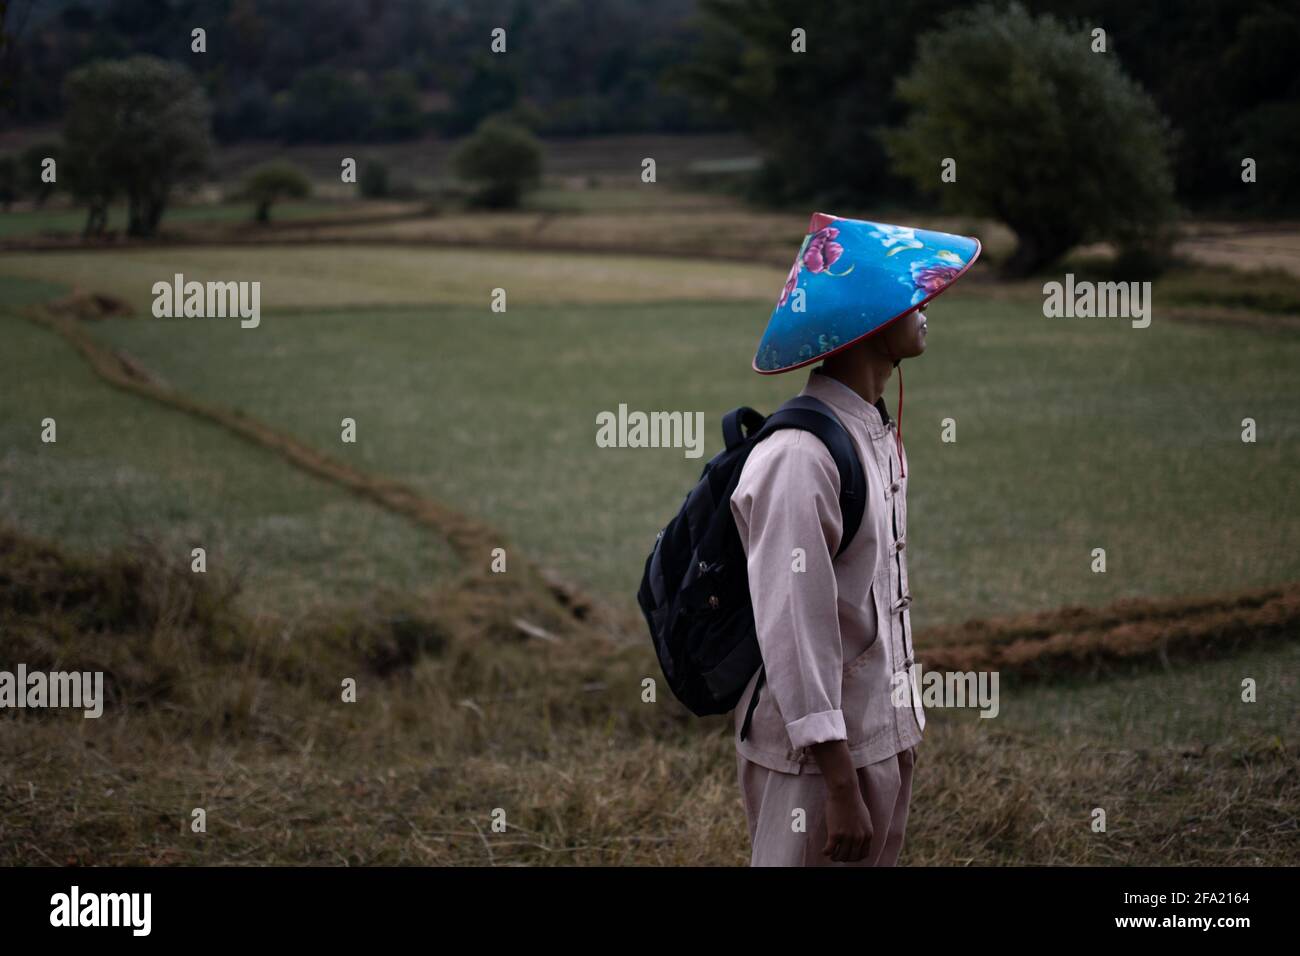 A burmese man in traditional clothing and a colorful blue hat trekking from Kalaw to Inle Lake, Shan state, Myanmar Stock Photo